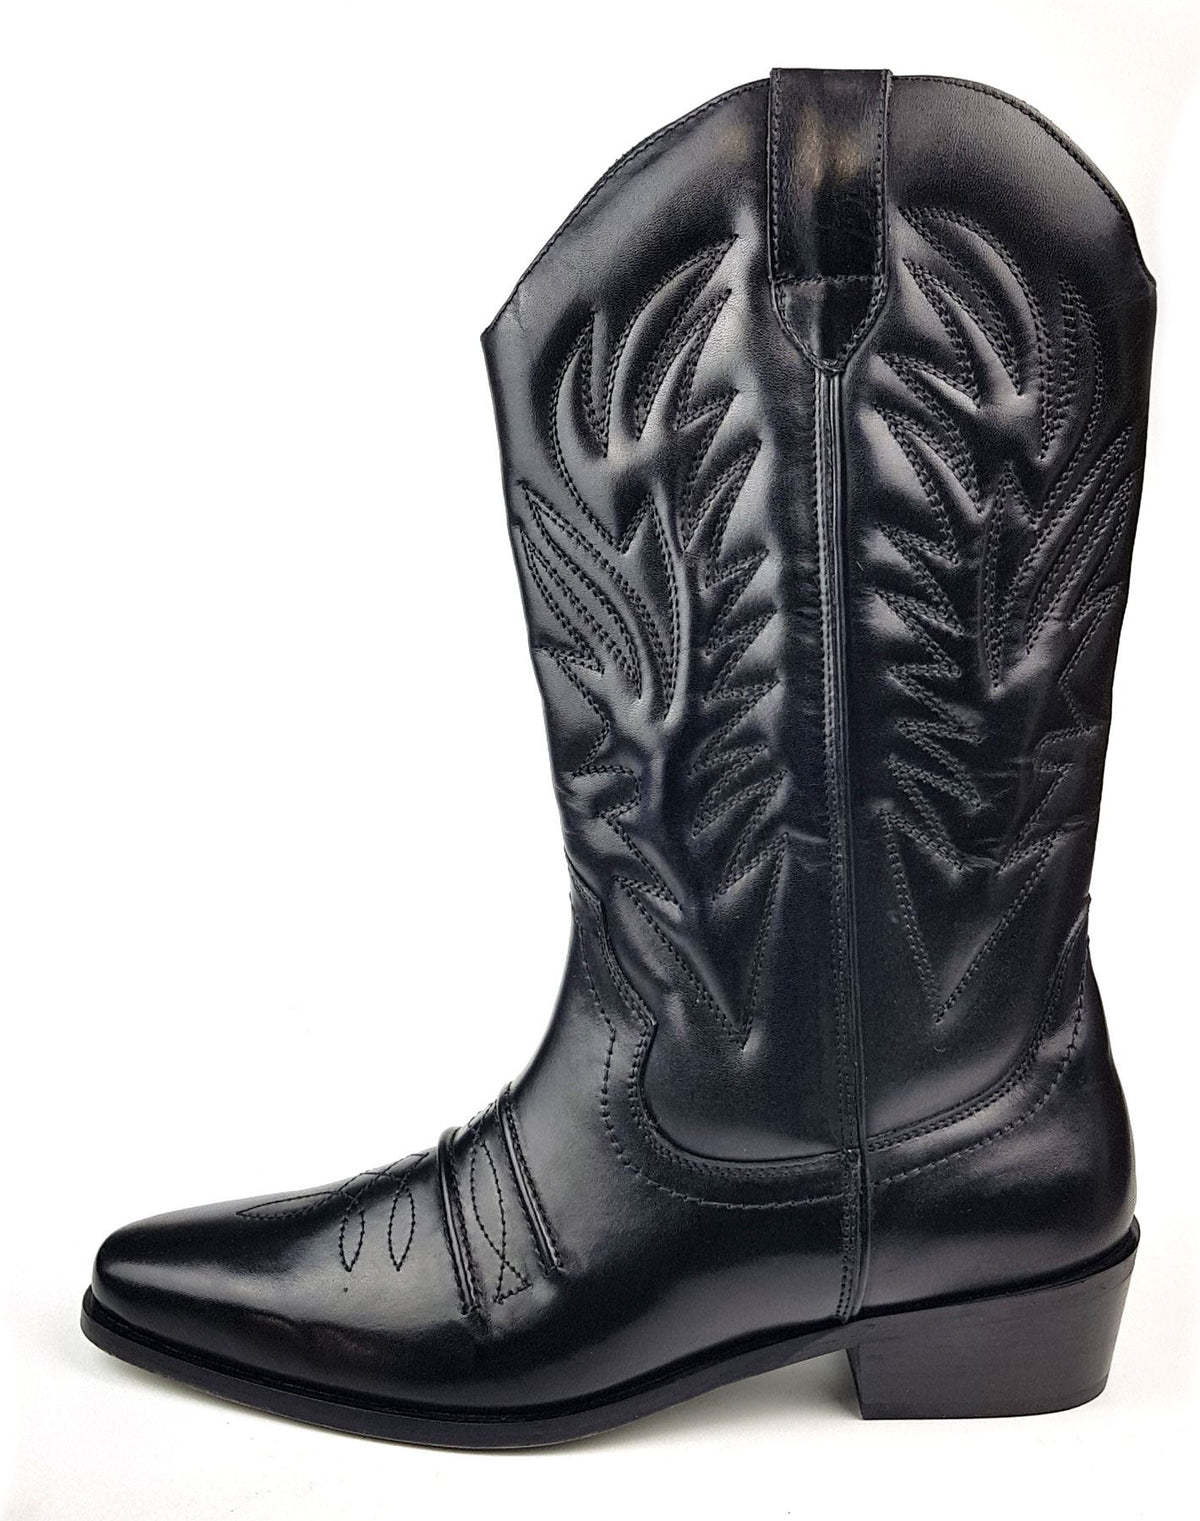 Woodland Cowboy Western Leather Long Calf Boots